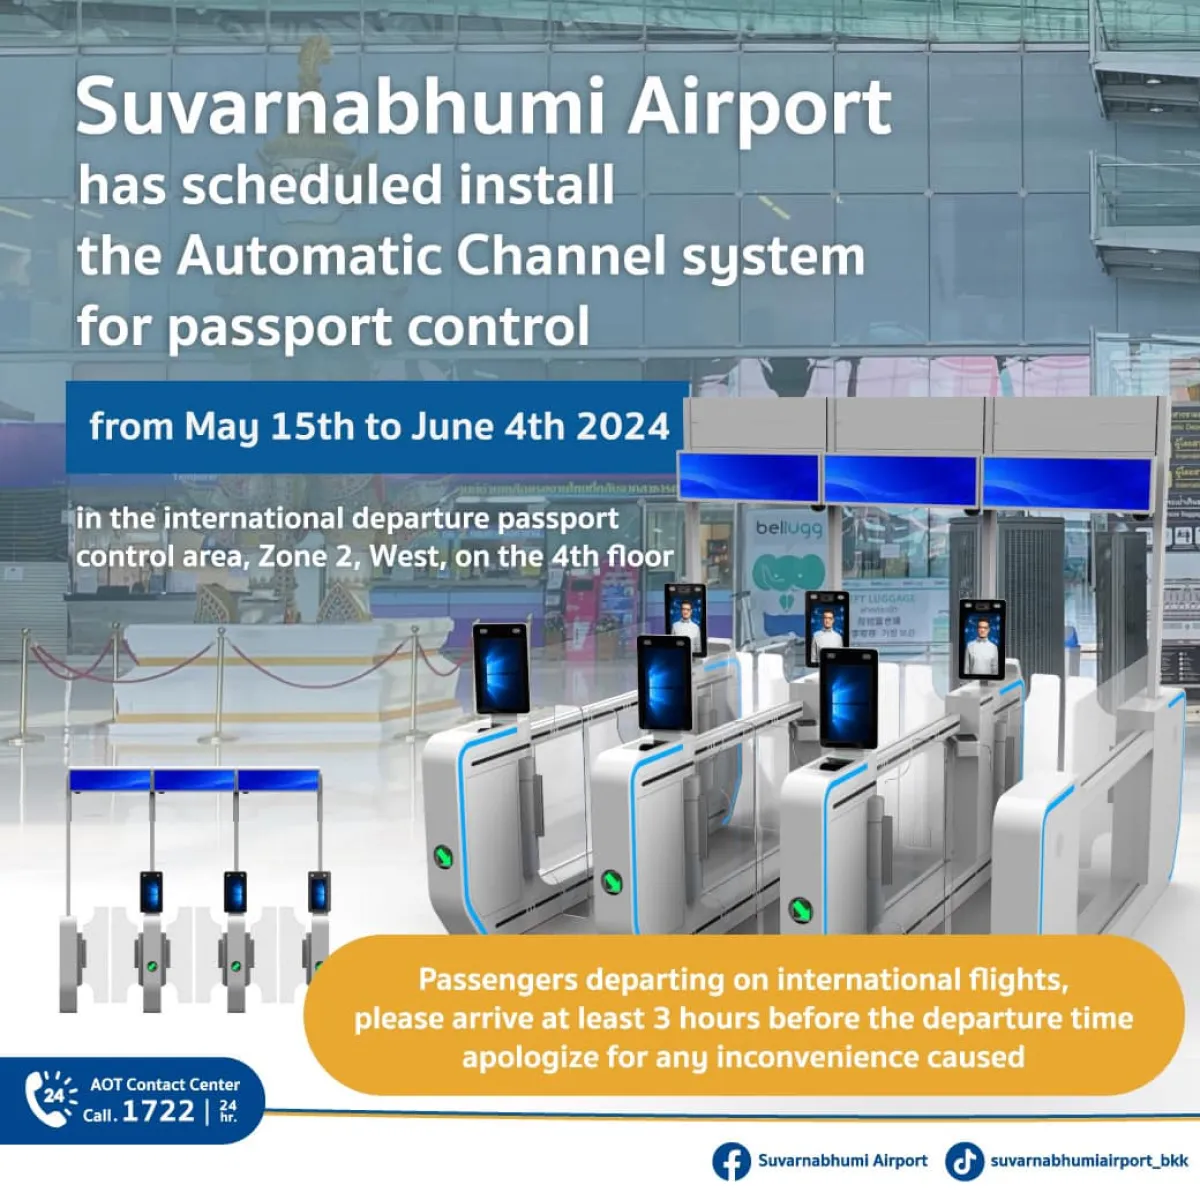 Suvarnabhumi Airport (BKK) has scheduled the installation of a new Automatic Channel for passport screening system and equipment to replace the existing model.